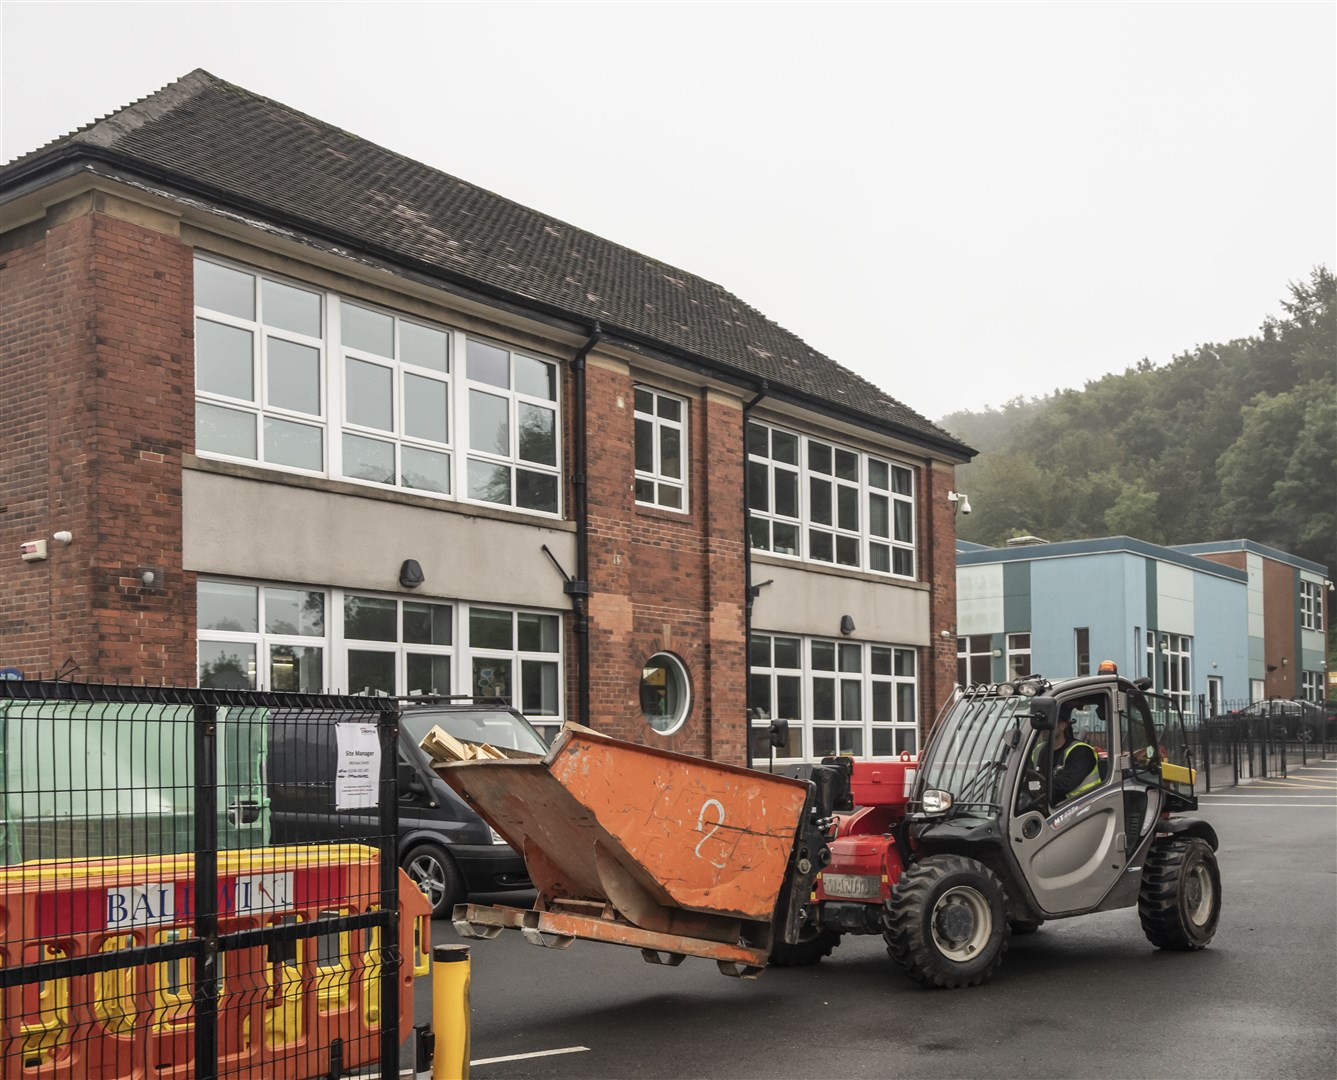 Workmen at Abbey Lane Primary School in Sheffield, where problematic Raac has been found (Danny Lawson/PA)